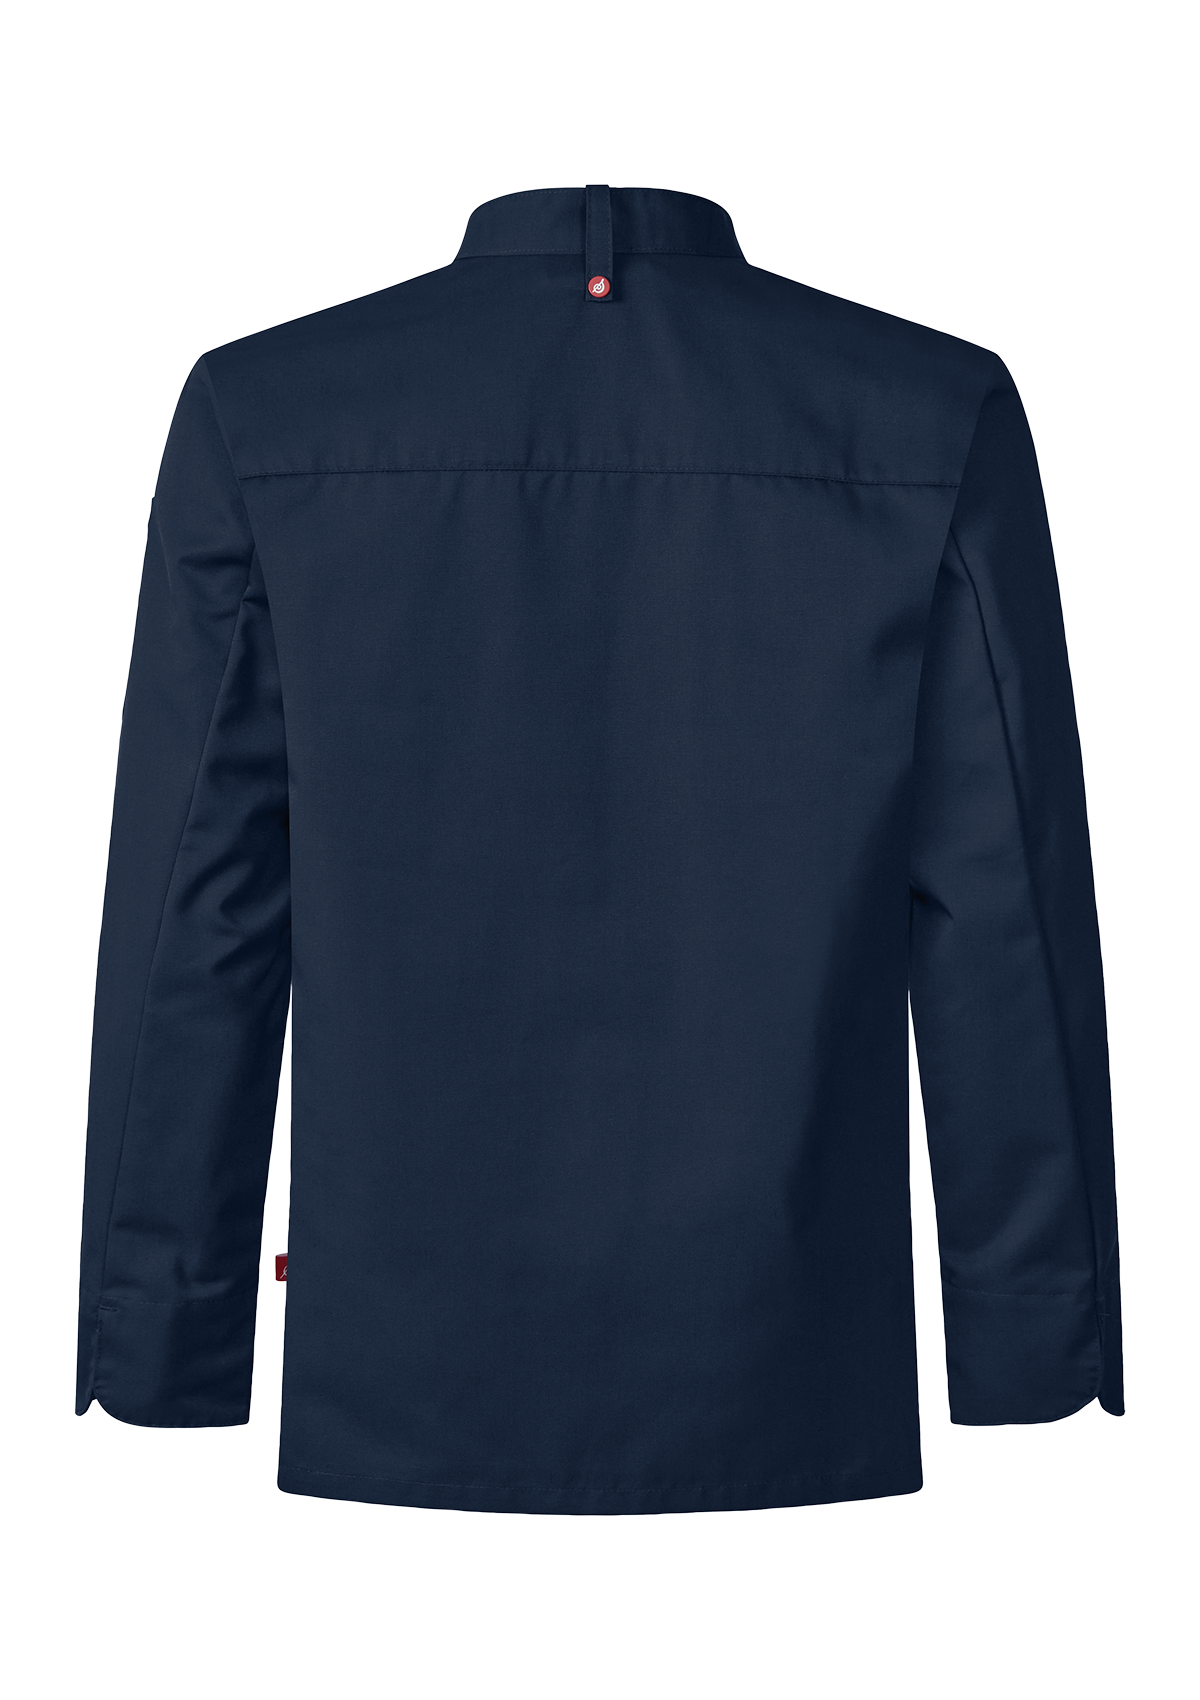 Smart-Unisex Chef's Shirt with Long Sleeves